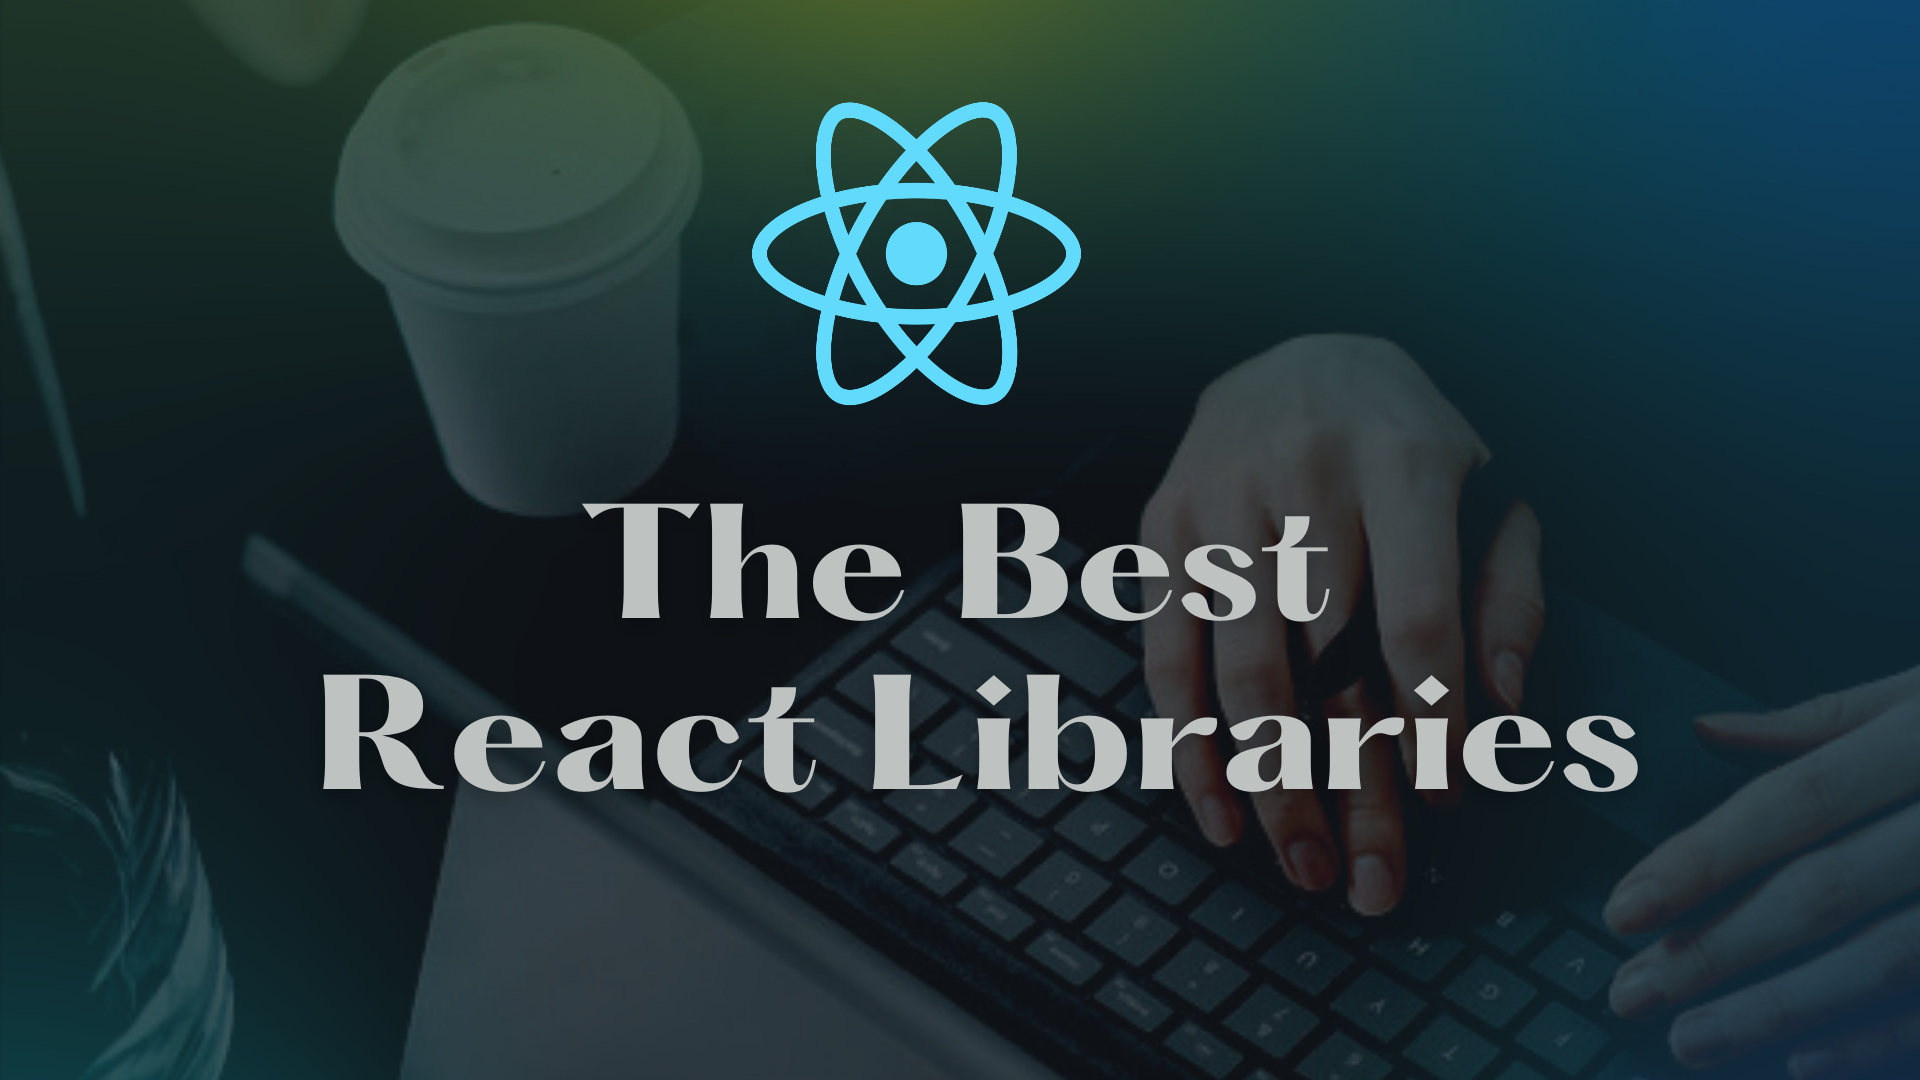 The Best React Libraries